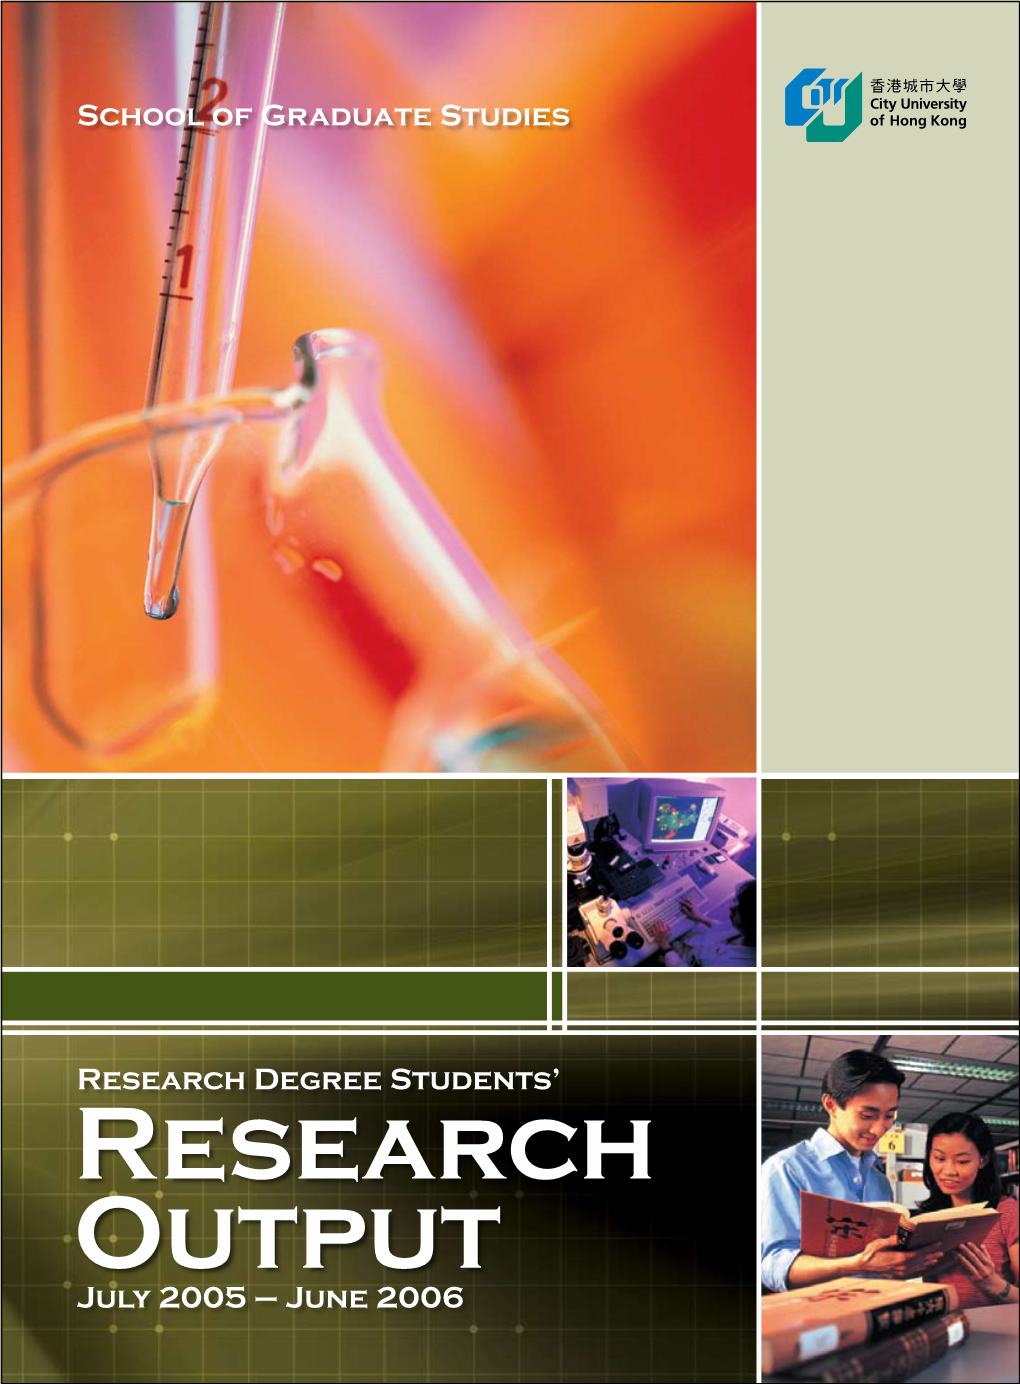 Research Degree Students' Research Output (July 2005